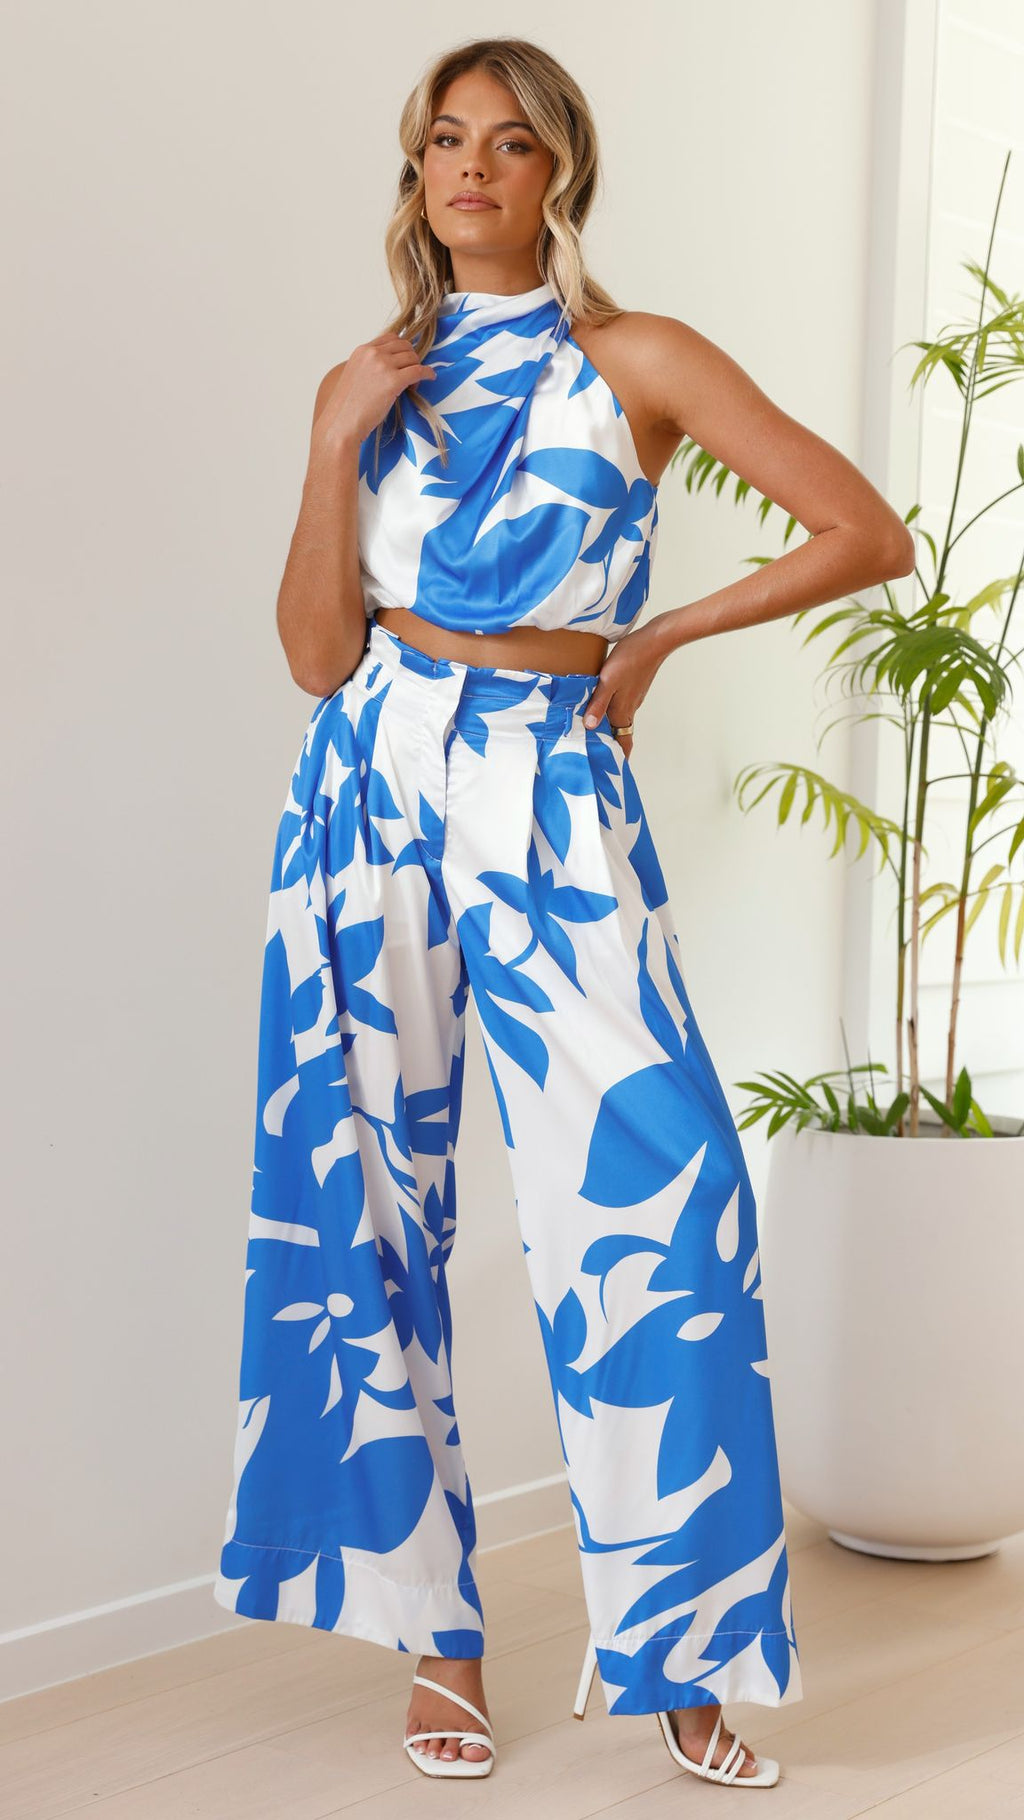 Stella Pants and Top Set - Blue/White Floral - Billy J